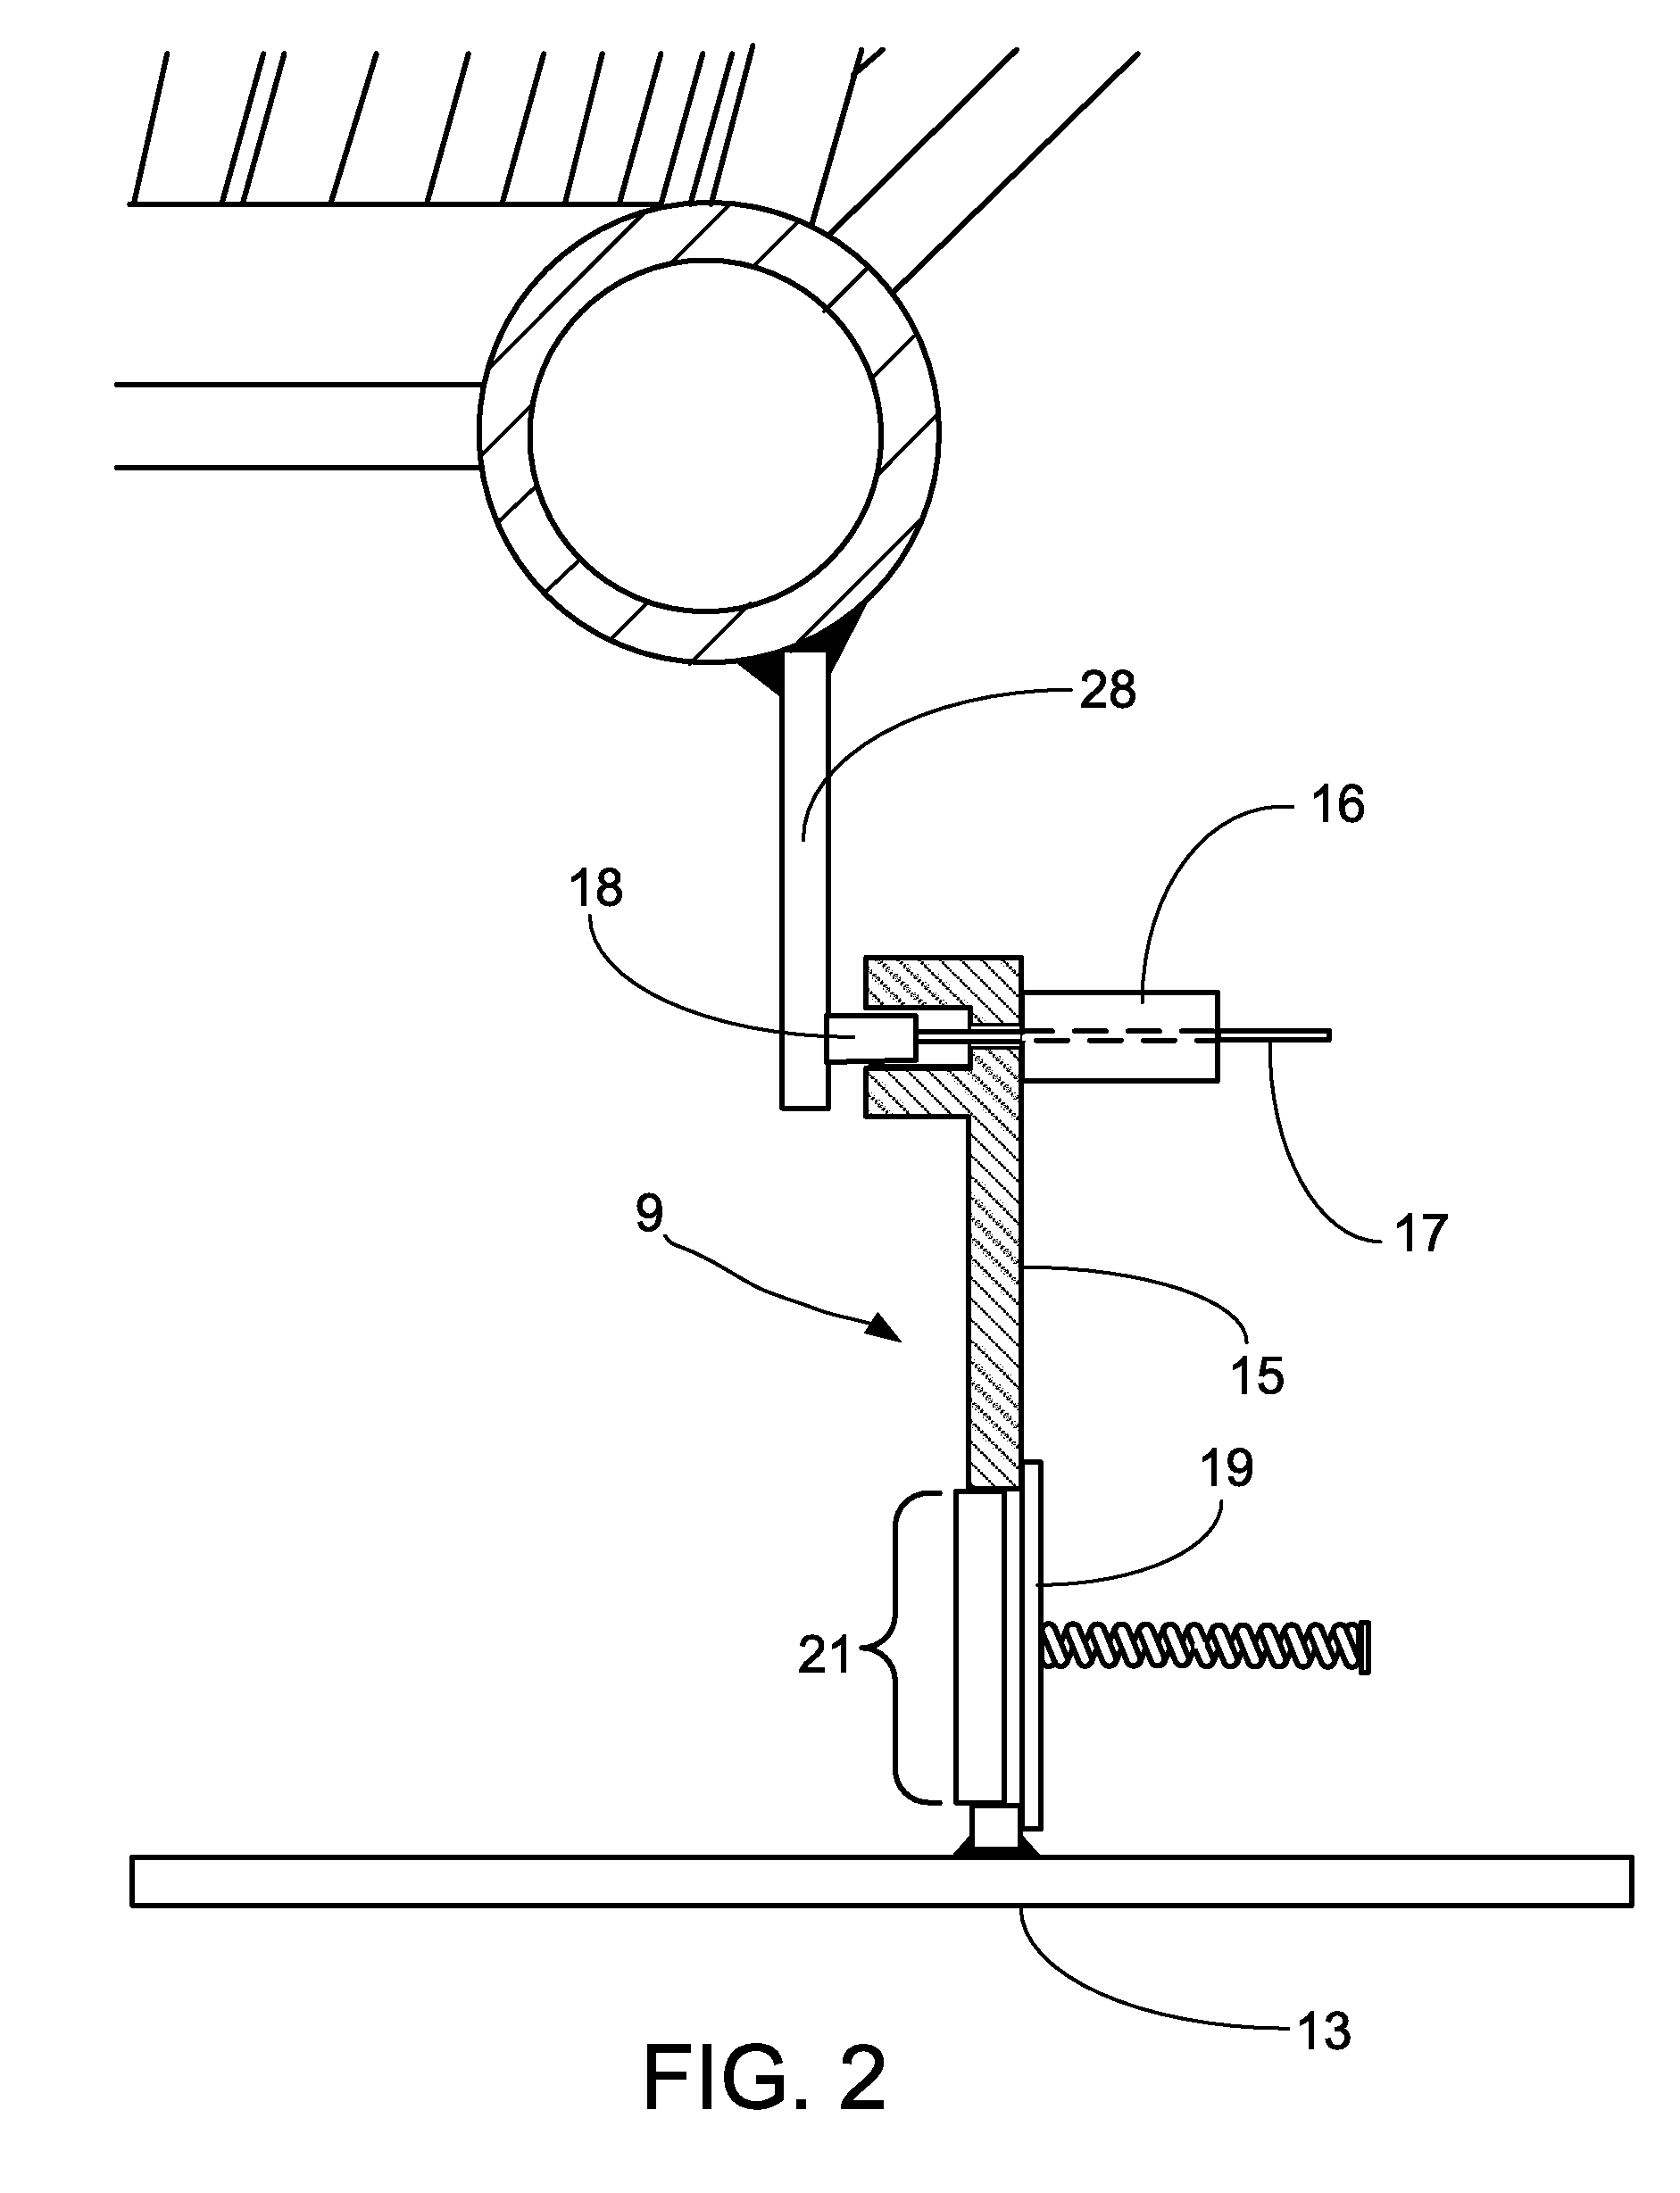 Sealing arrangement with a segmented seal and pressure relief